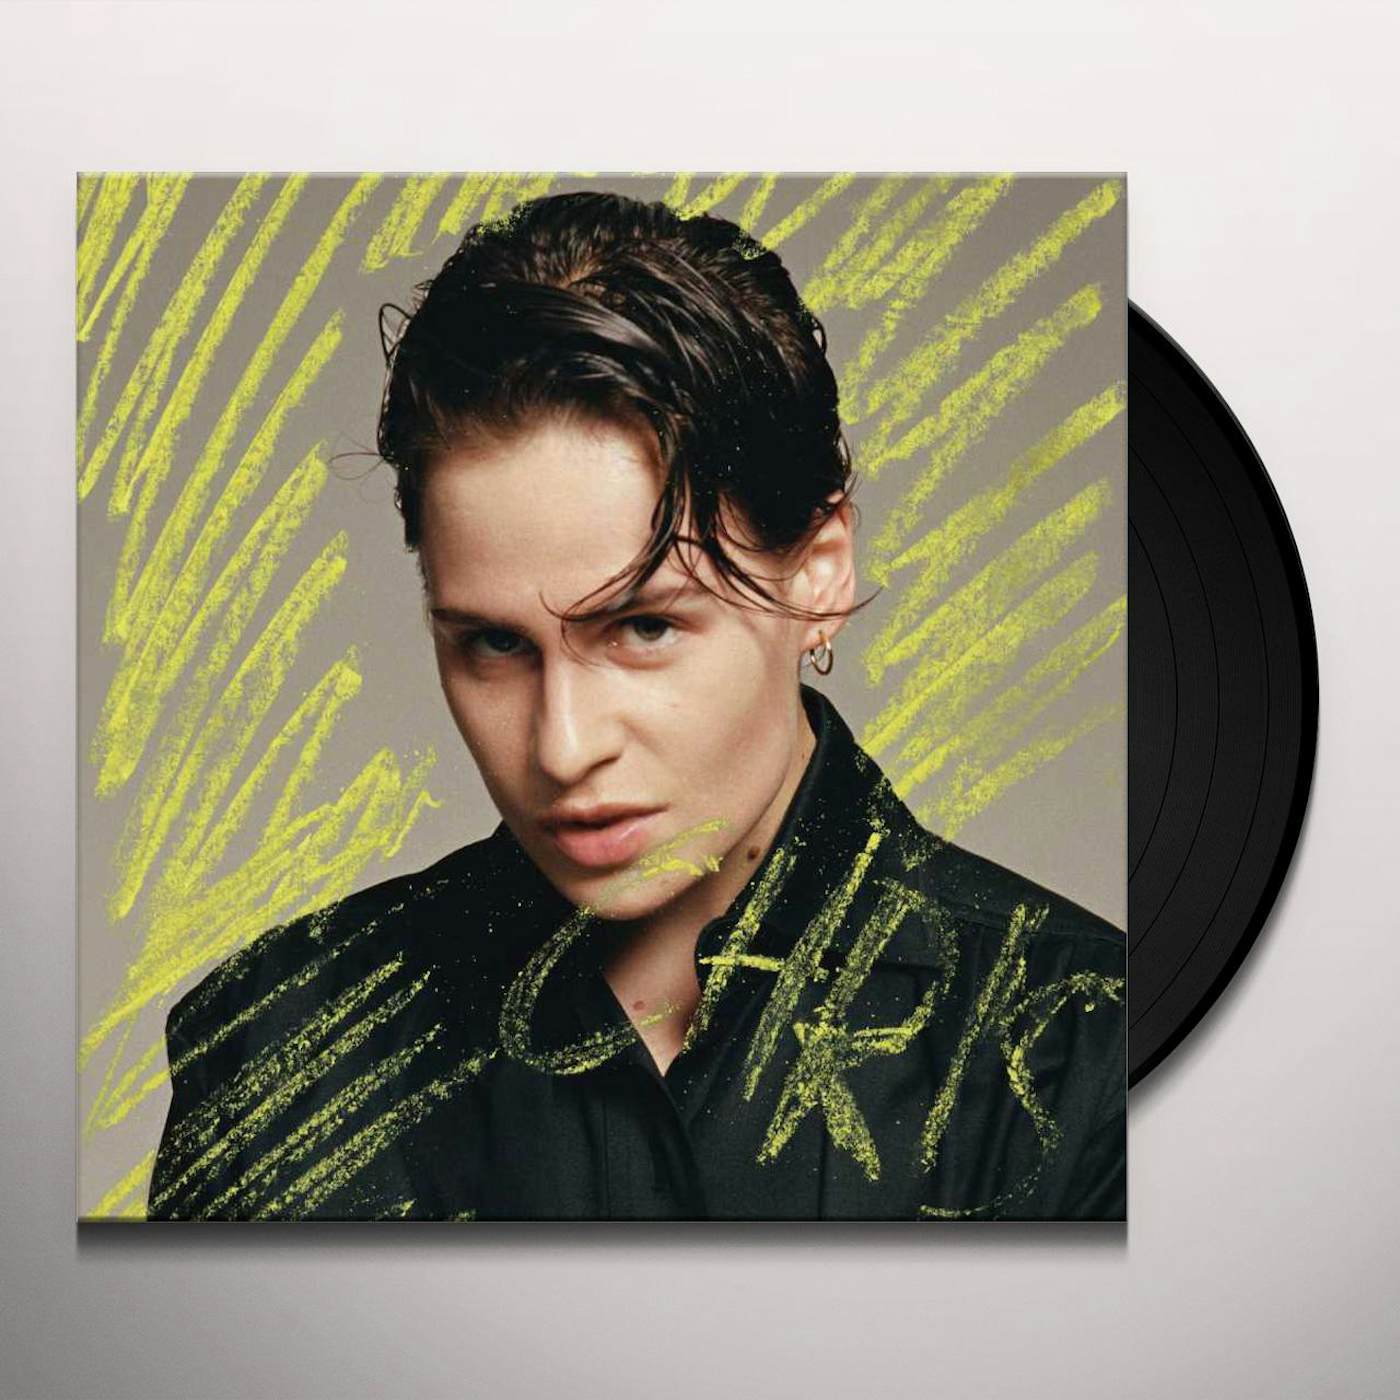 Christine and the Queens Chris (English Edition)(2 LP + CD) Vinyl Record